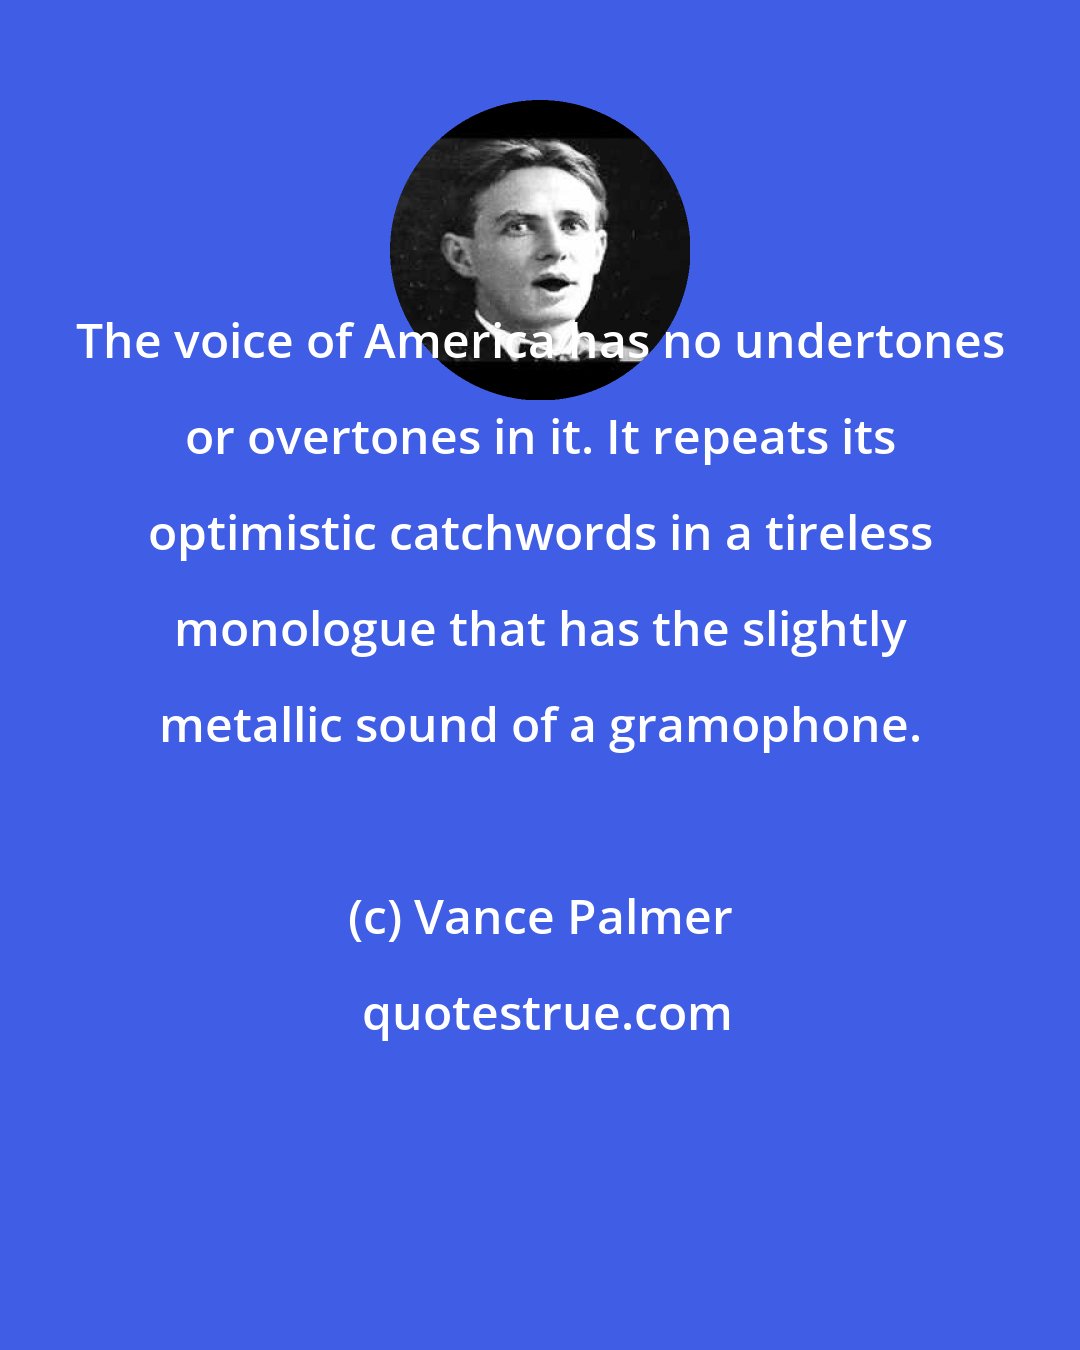 Vance Palmer: The voice of America has no undertones or overtones in it. It repeats its optimistic catchwords in a tireless monologue that has the slightly metallic sound of a gramophone.